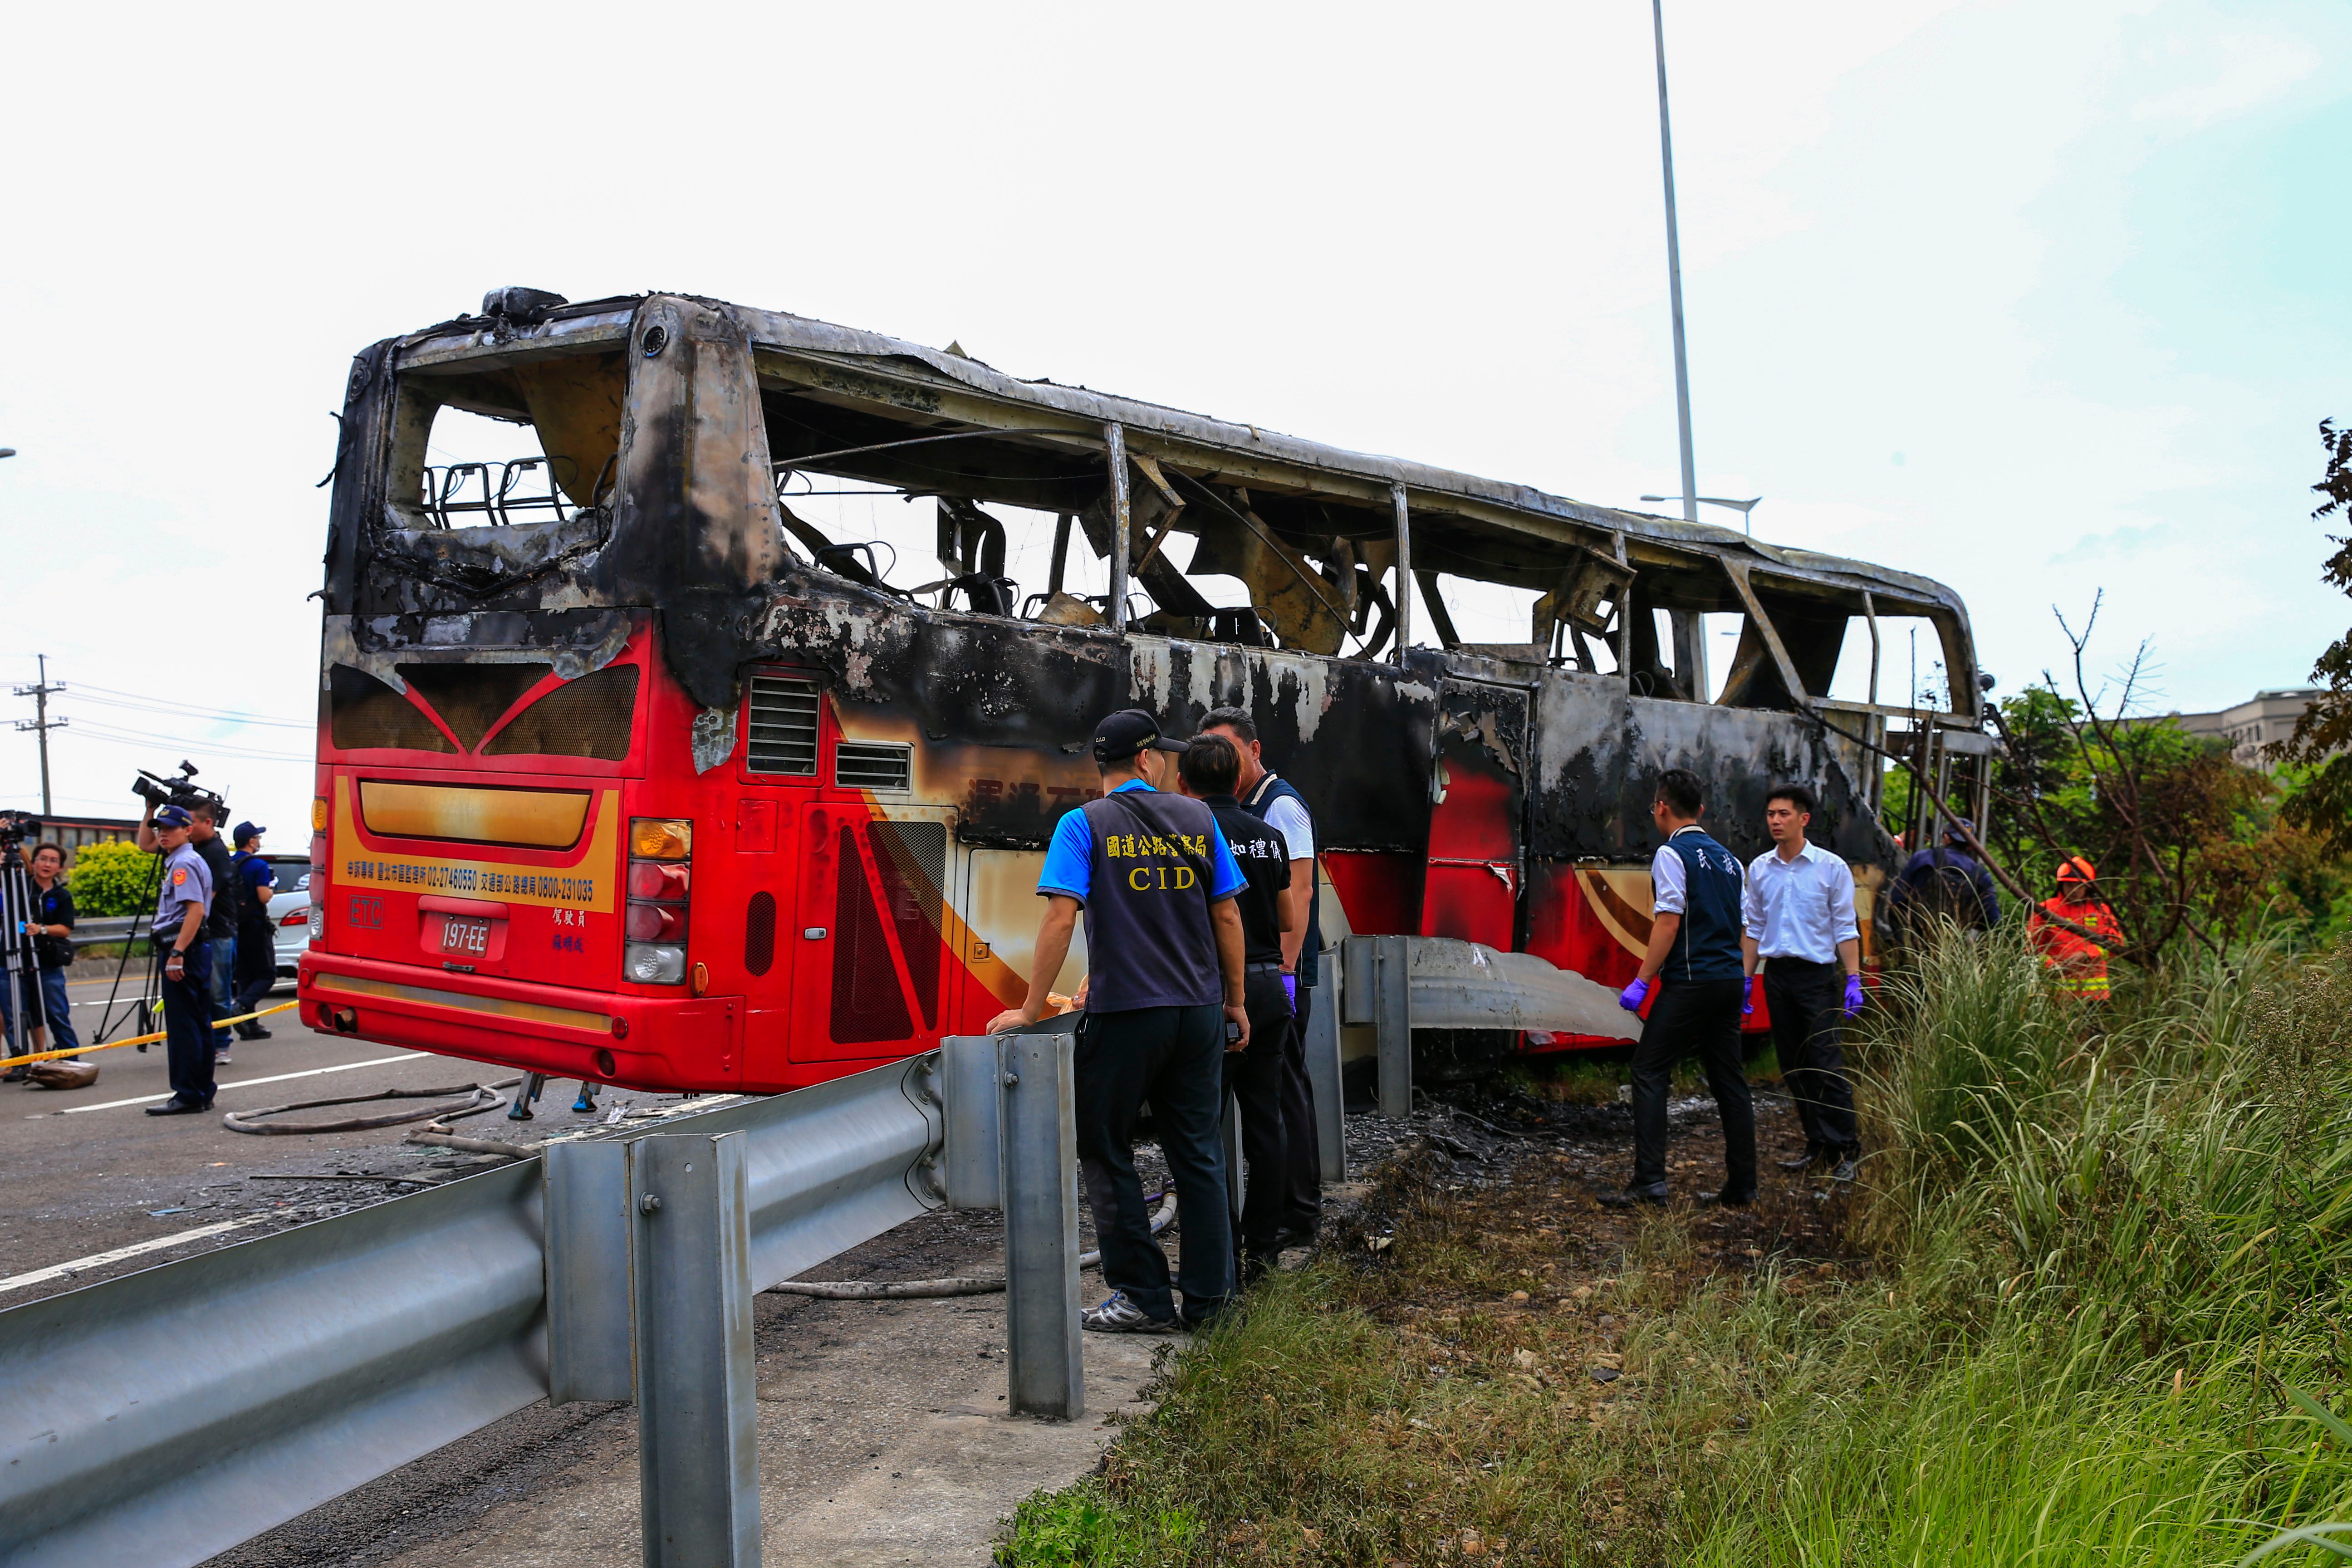 INVESTIGATION. Taiwanese investigators respond after a tourist bus crashed and burned in Taoyuan, Taiwan on July 19, 2016. Photo by Ritchie B. Tongo/EPA 